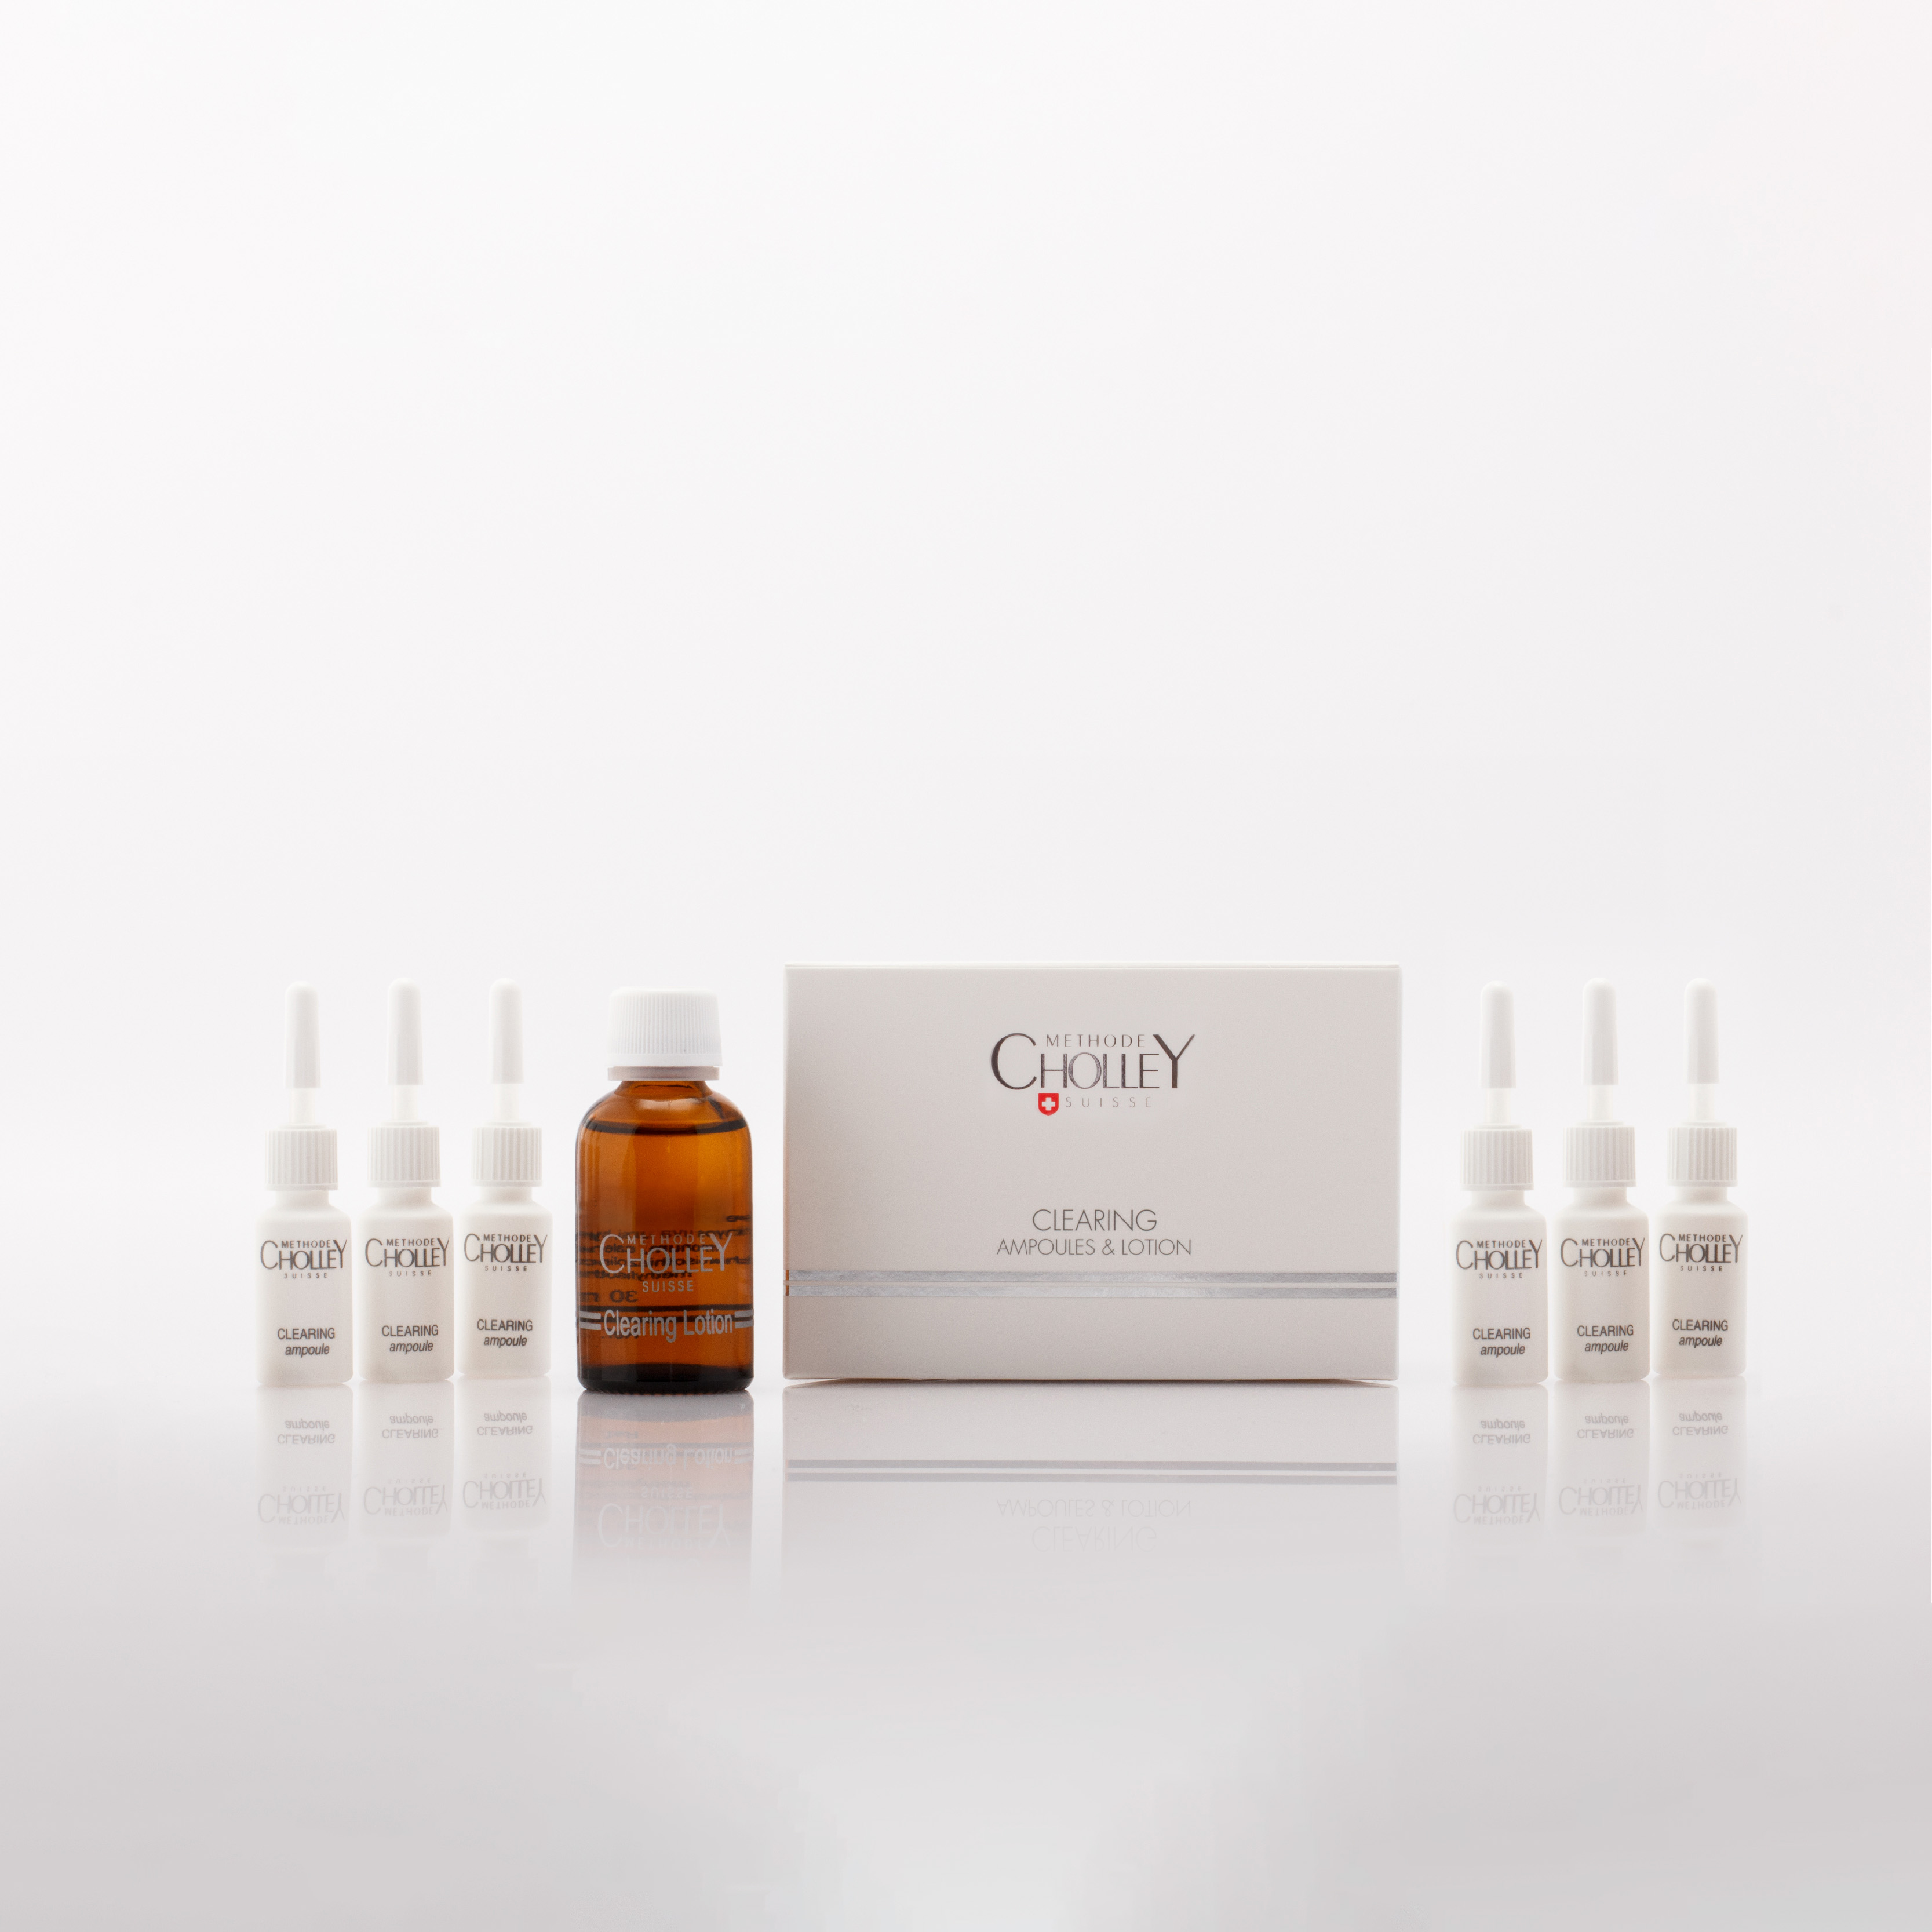 CHOLLEY Clearing Ampoules